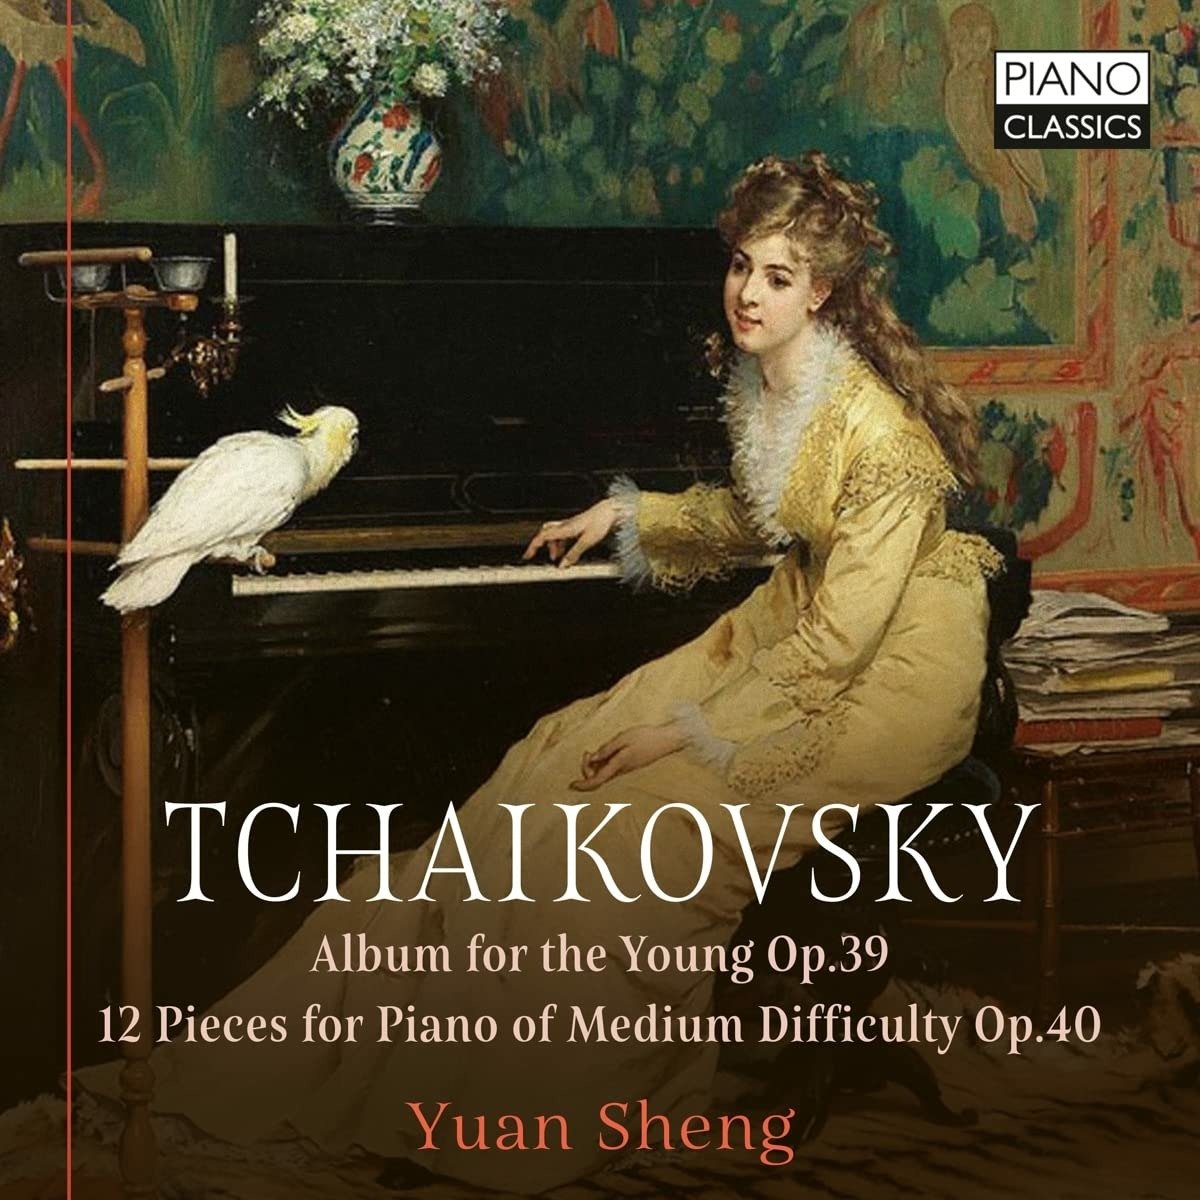 CD Shop - SHENG, YUAN TCHAIKOVSKY: ALBUM FOR THE YOUNG OP.39/12 PIECES FOR PIANO OF MEDIUM DIFFICULTY OP.40